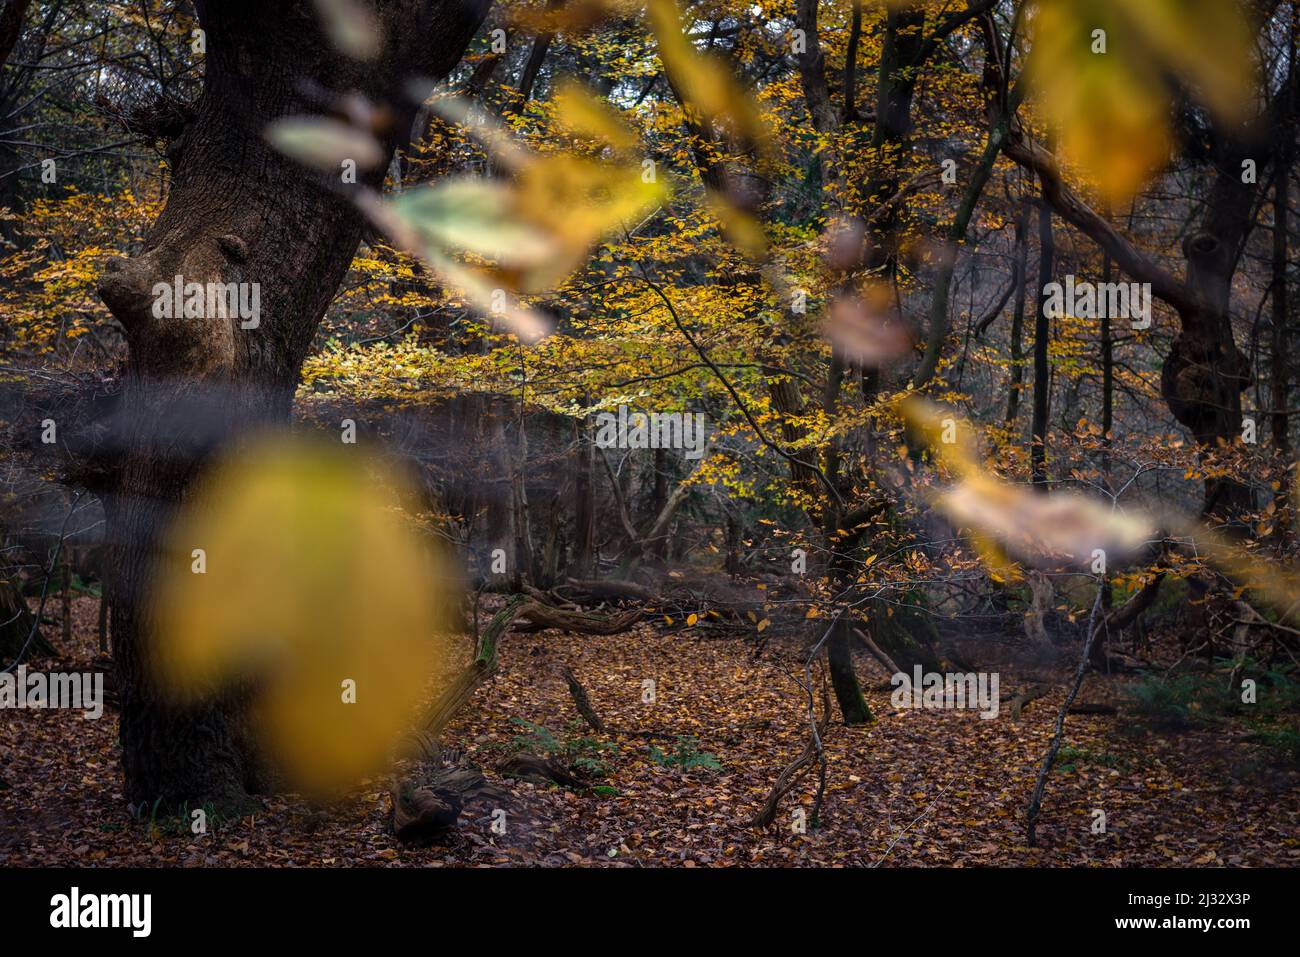 Autumn leaves in the Baumweg primeval forest, Ahlhorn, Lower Saxony, Germany, Europe Stock Photo